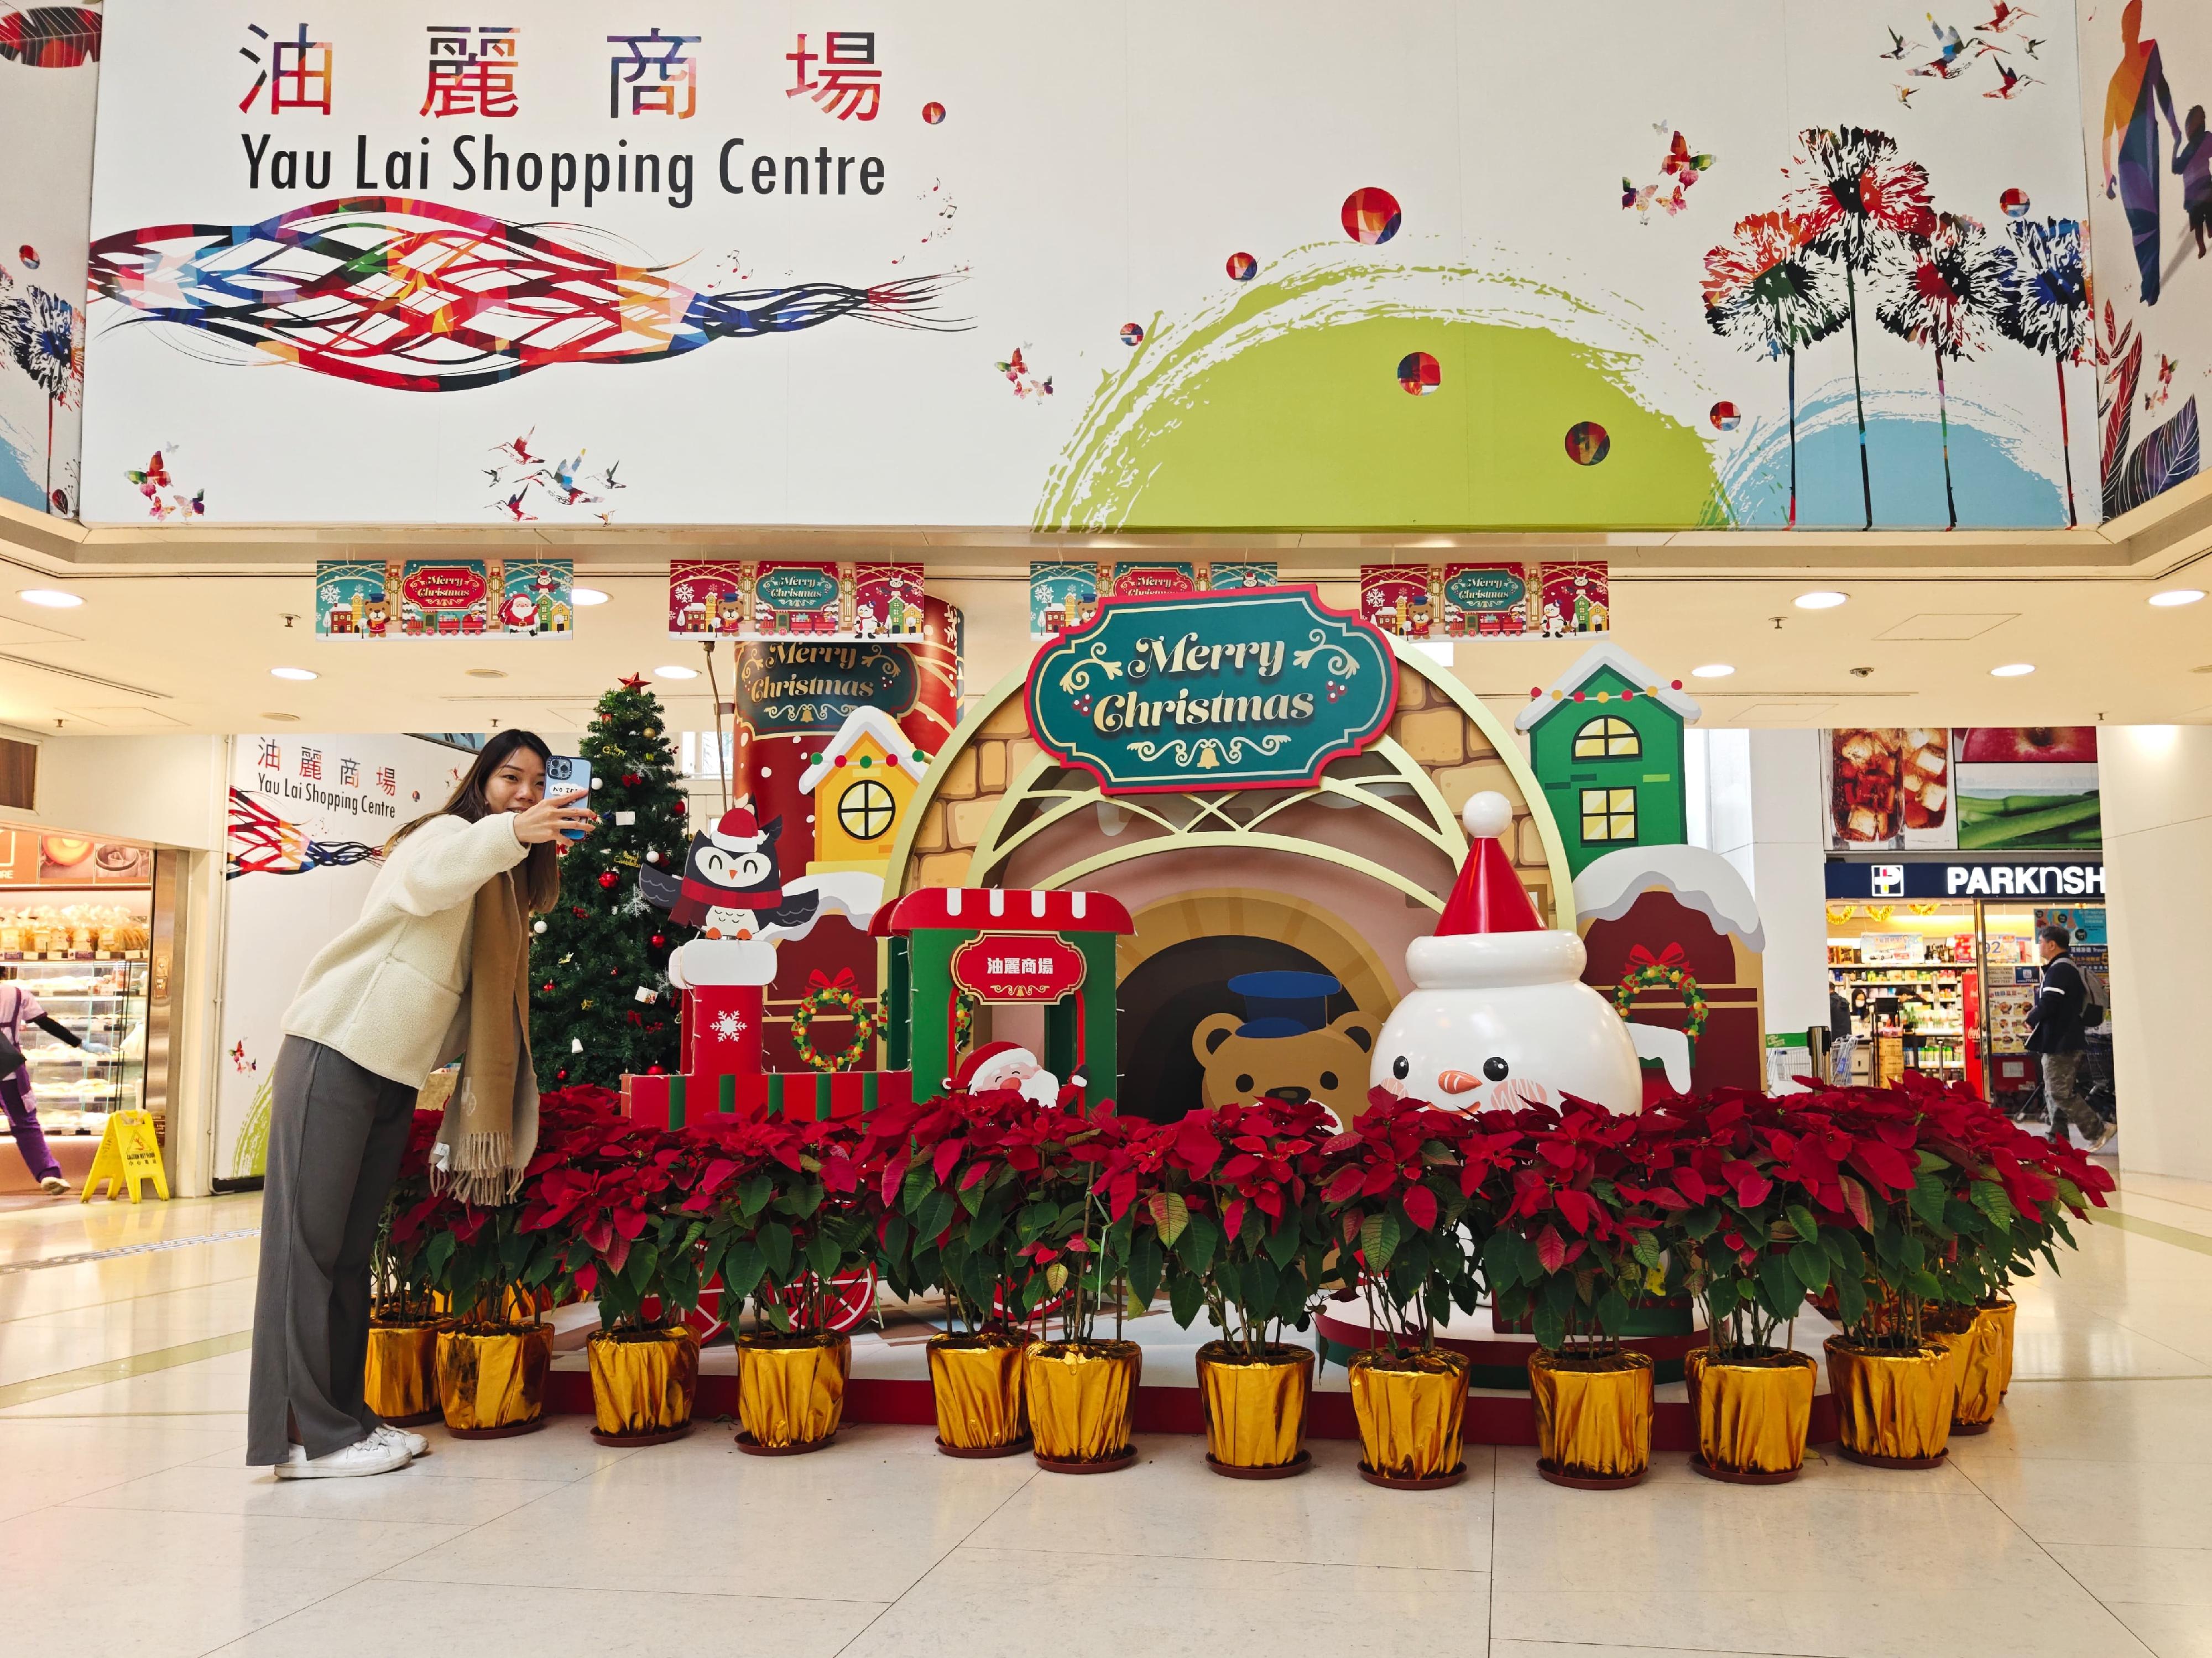 The Hong Kong Housing Authority (HA) is launching Christmas promotions and night vibe activities at its shopping centres to share the holiday season's joy with the public. Photo shows Christmas decorations at the HA's Yau Lai Shopping Centre in Kwun Tong.